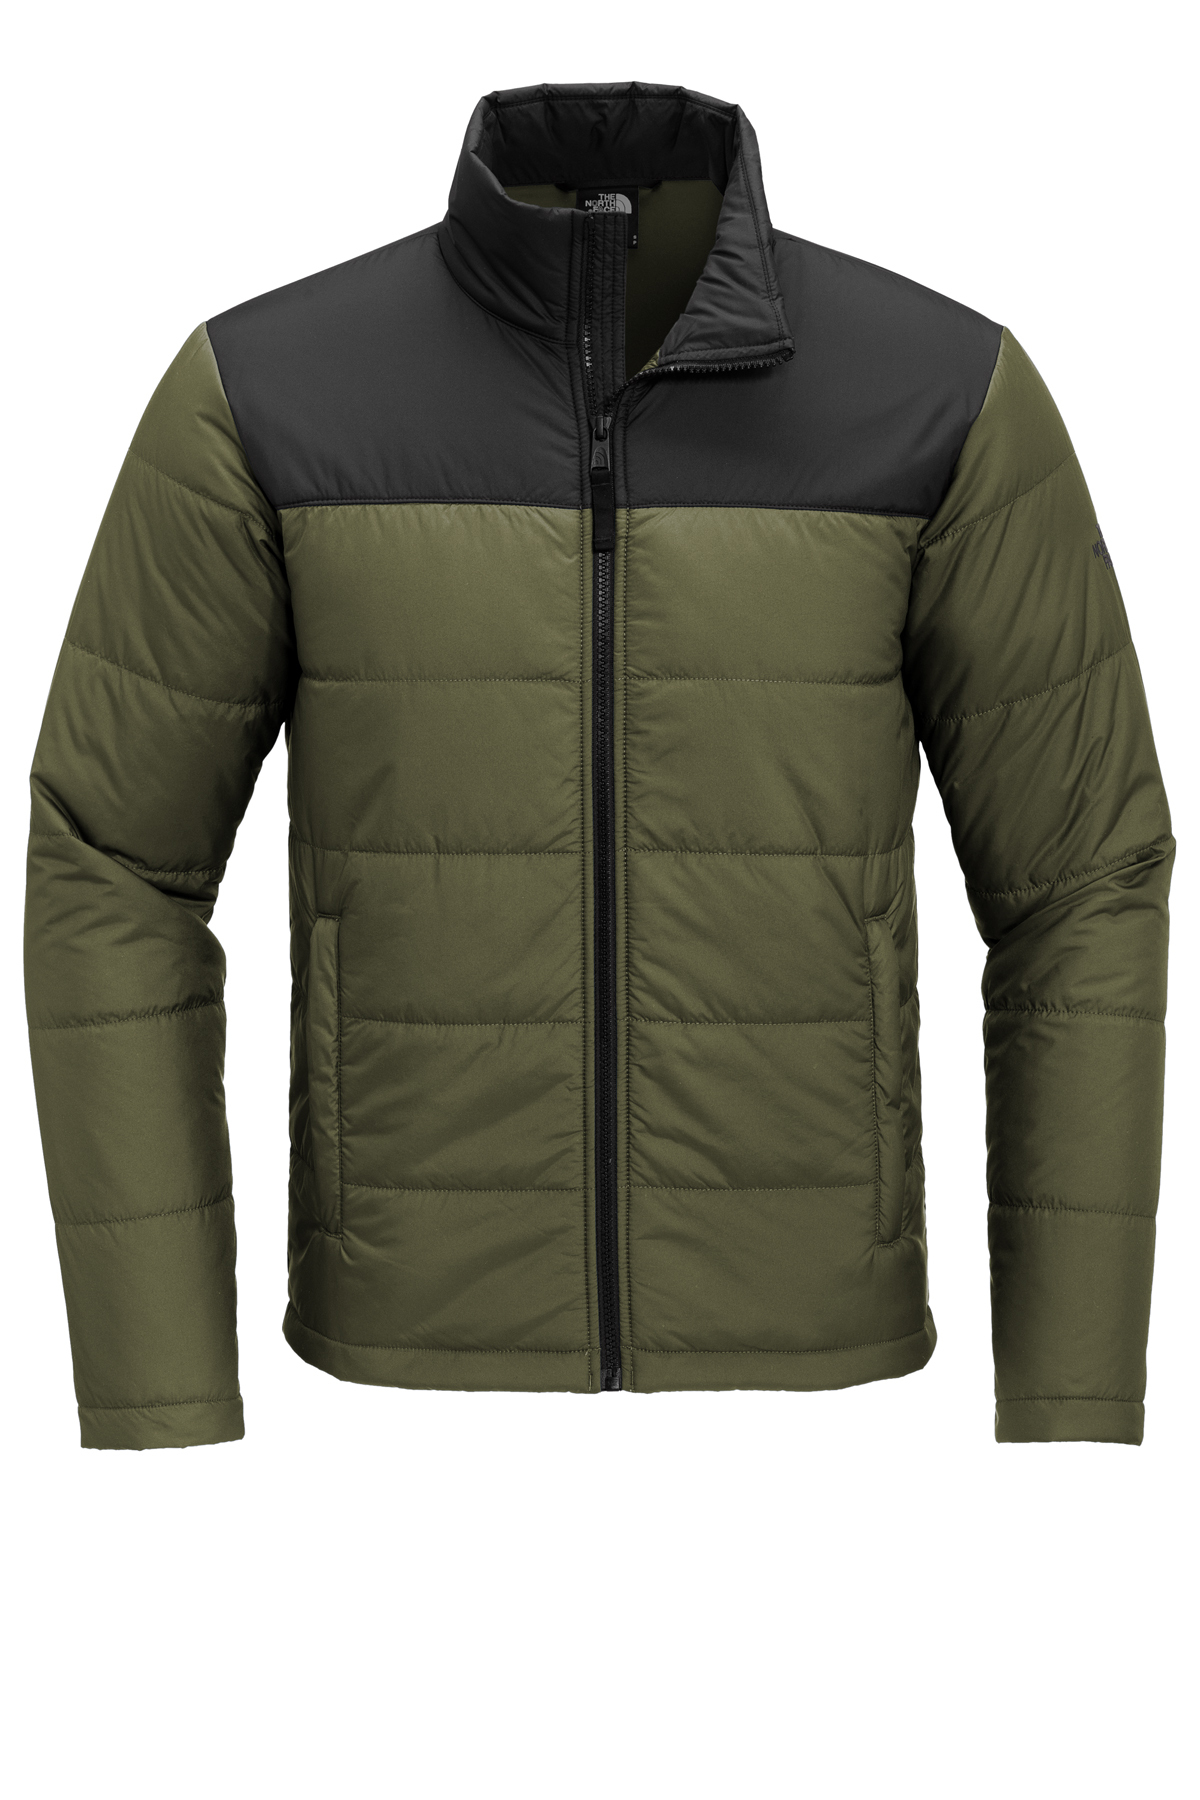 The North Face® NF0A529K - Everyday Insulated Jacket $108.42